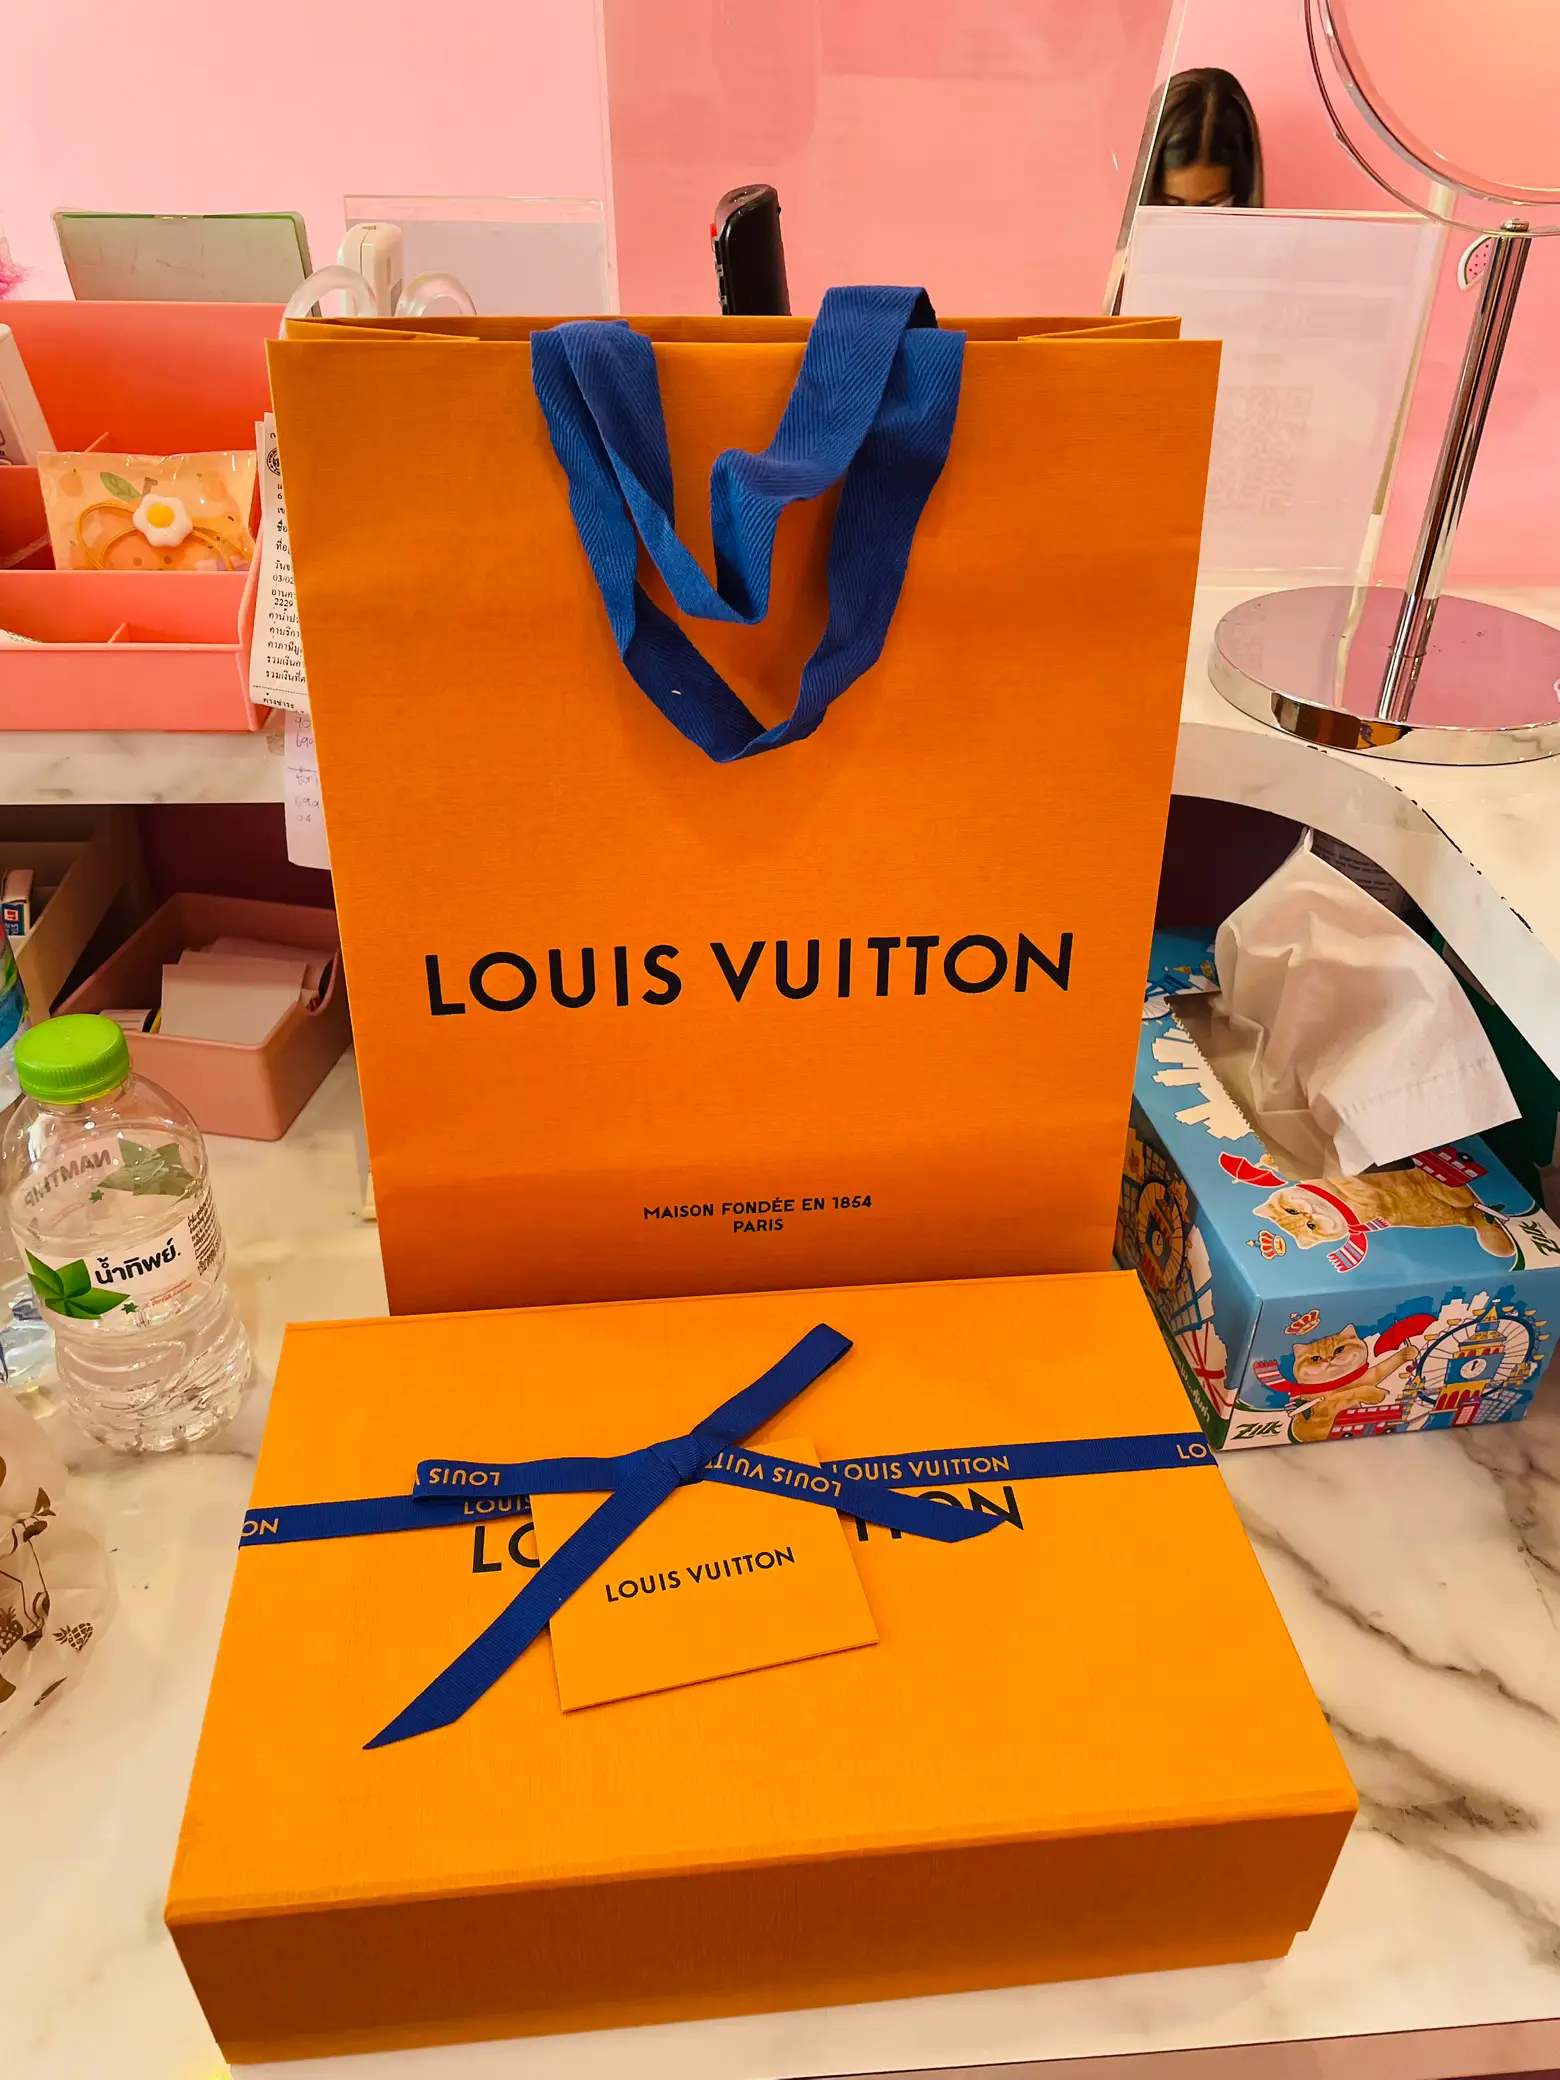 The cutest vanity from Louis Vuitton!, Gallery posted by michelleorgeta